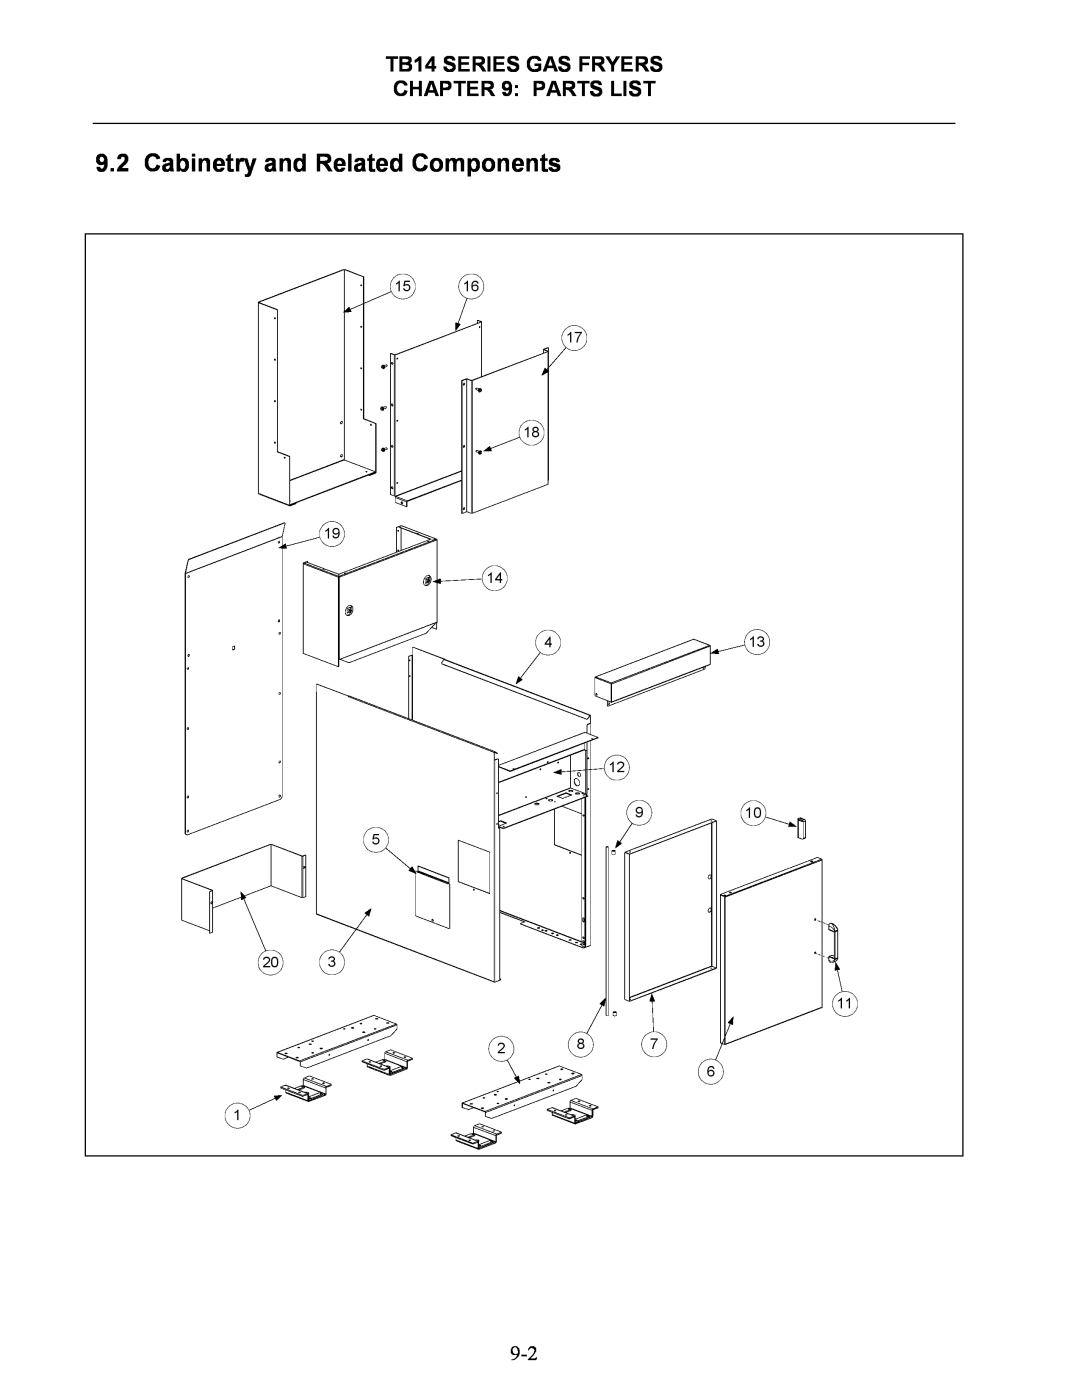 Frymaster operation manual Cabinetry and Related Components, TB14 SERIES GAS FRYERS PARTS LIST 